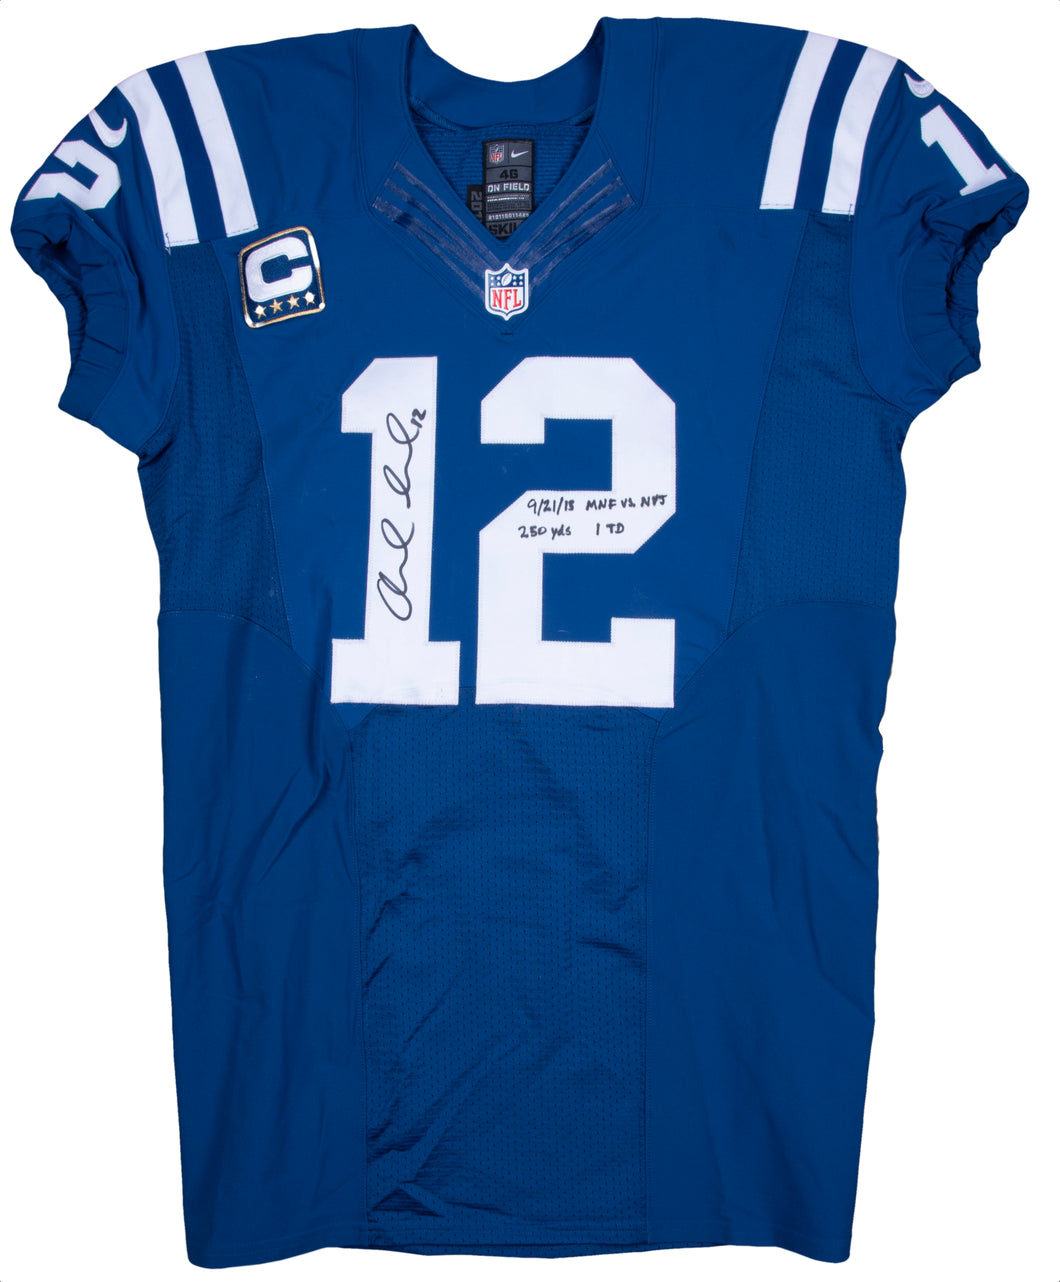 2015 Andrew Luck Game Used & Signed Indianapolis Colts Home Jersey Photo Matched To 9/21/2015